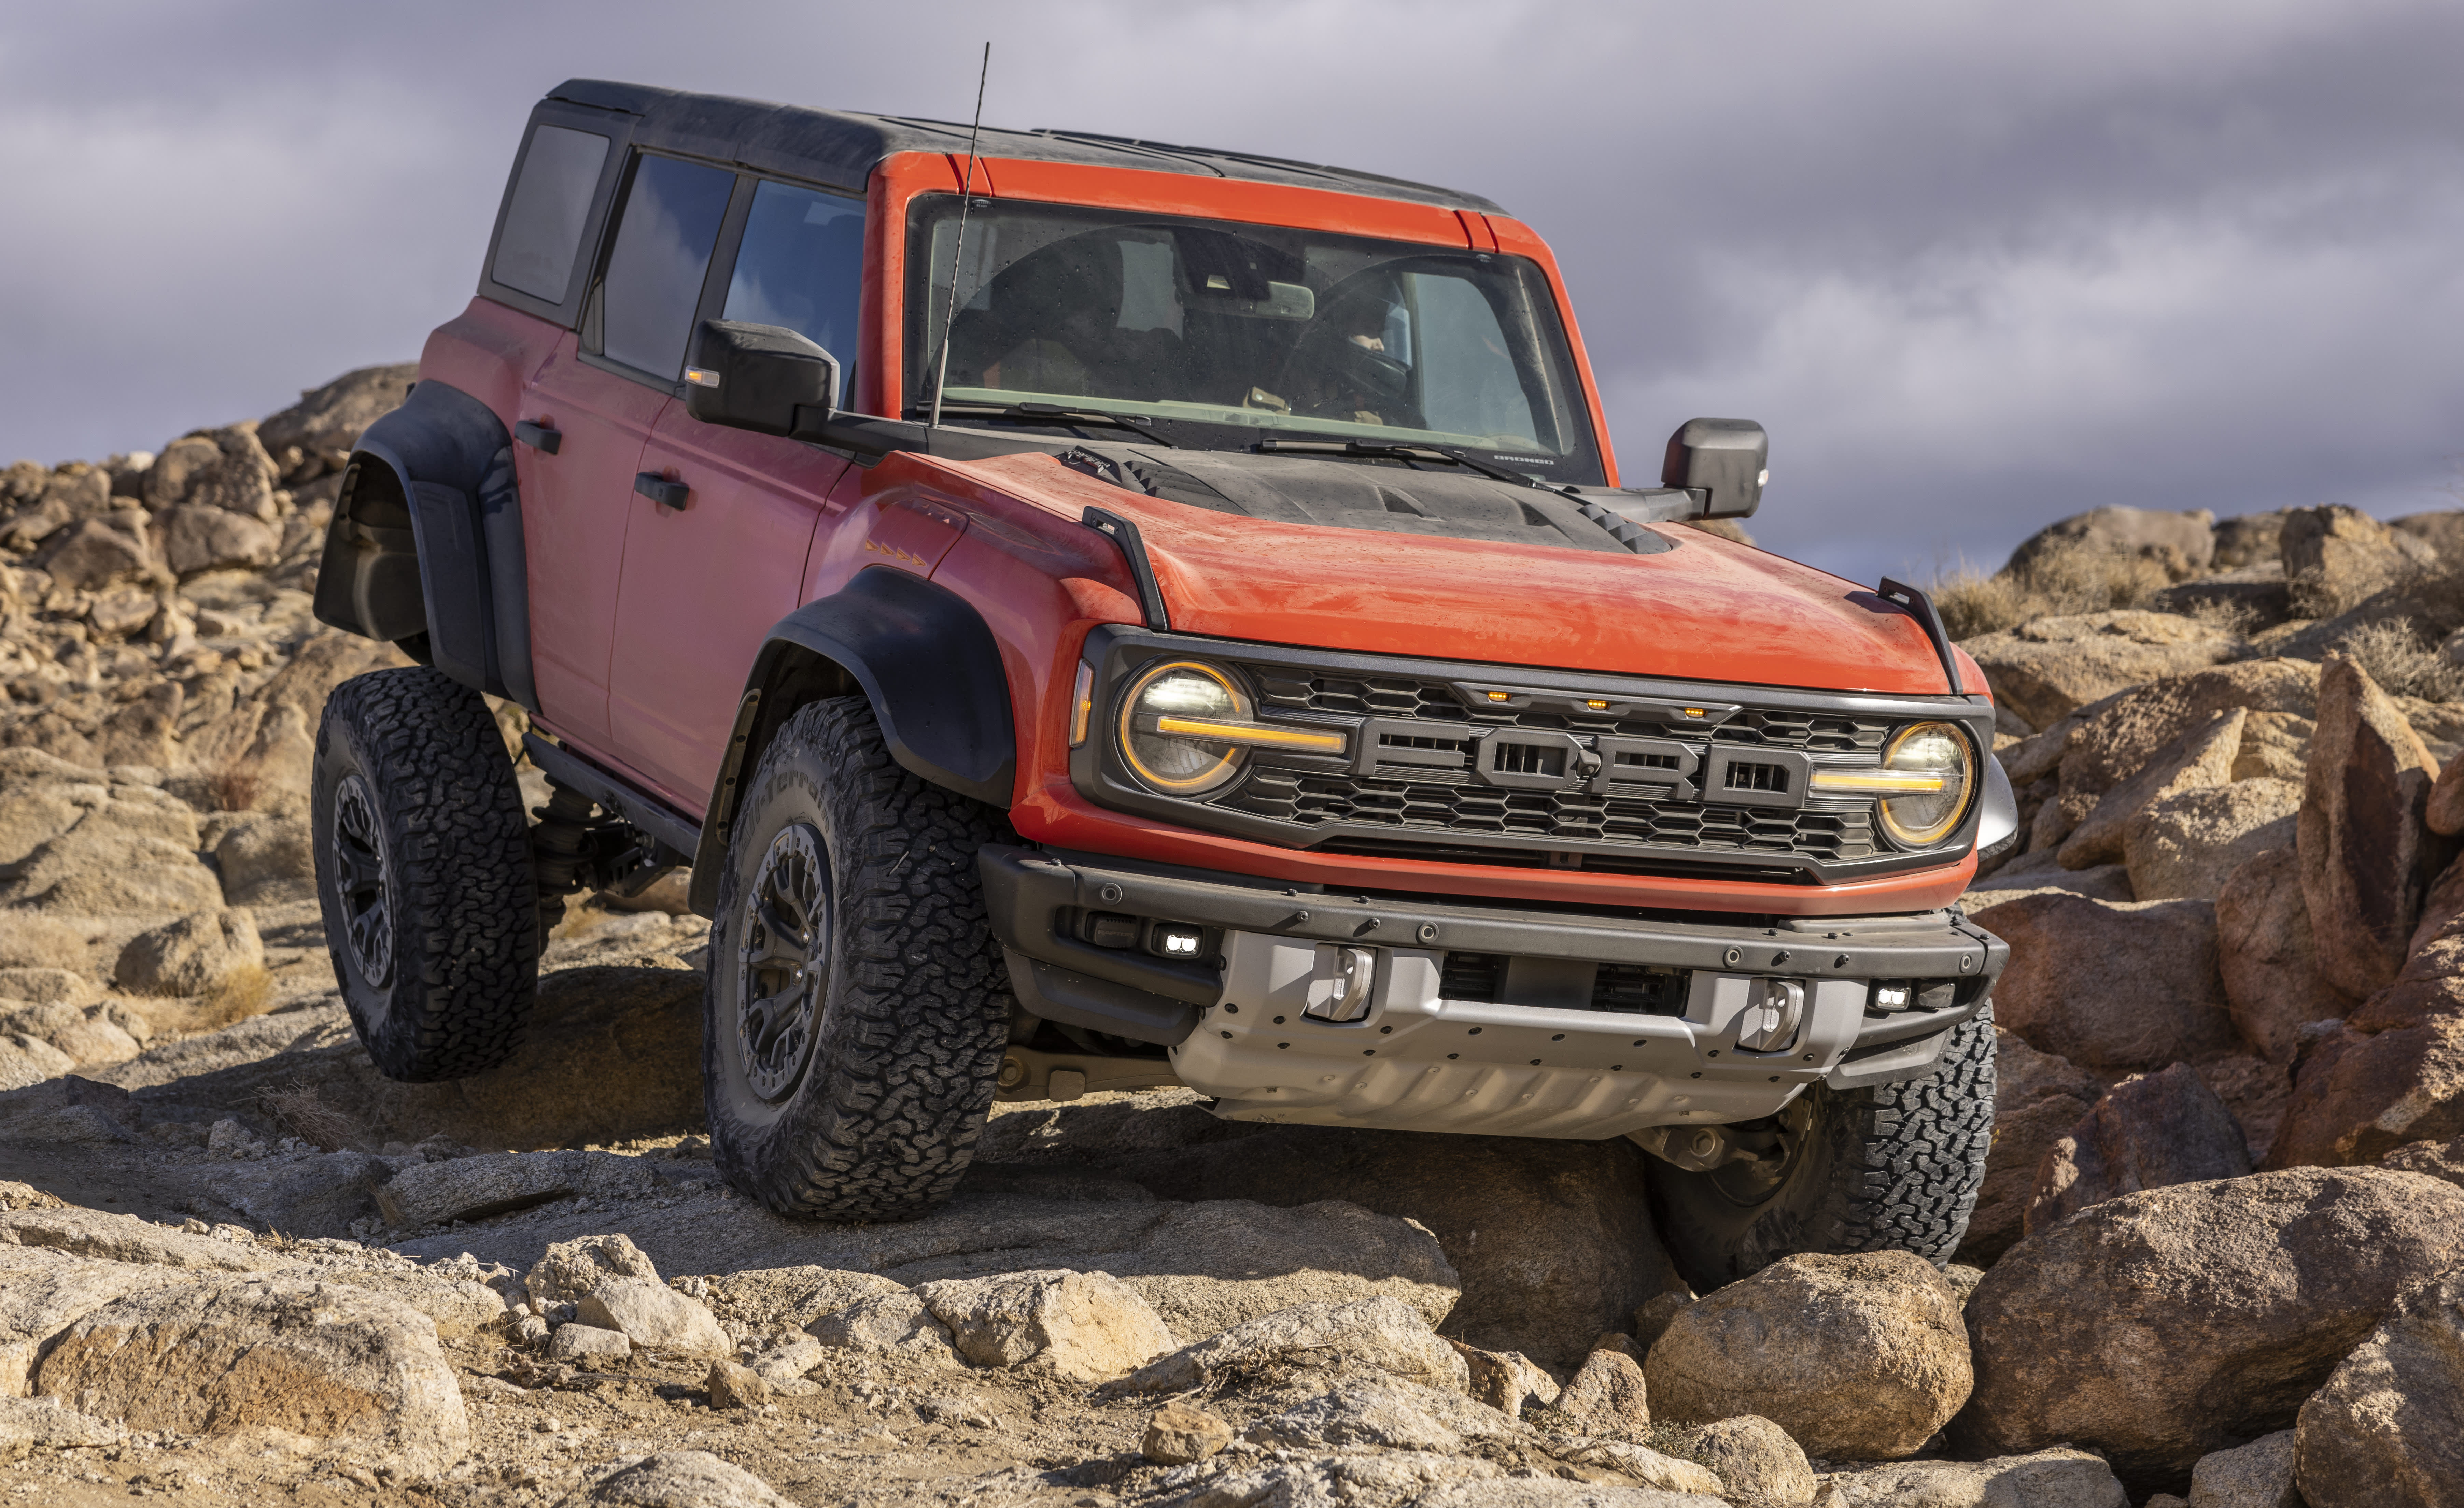 Ford Bronco Raptor SUV is a ‘desert-racing beast,” CEO says